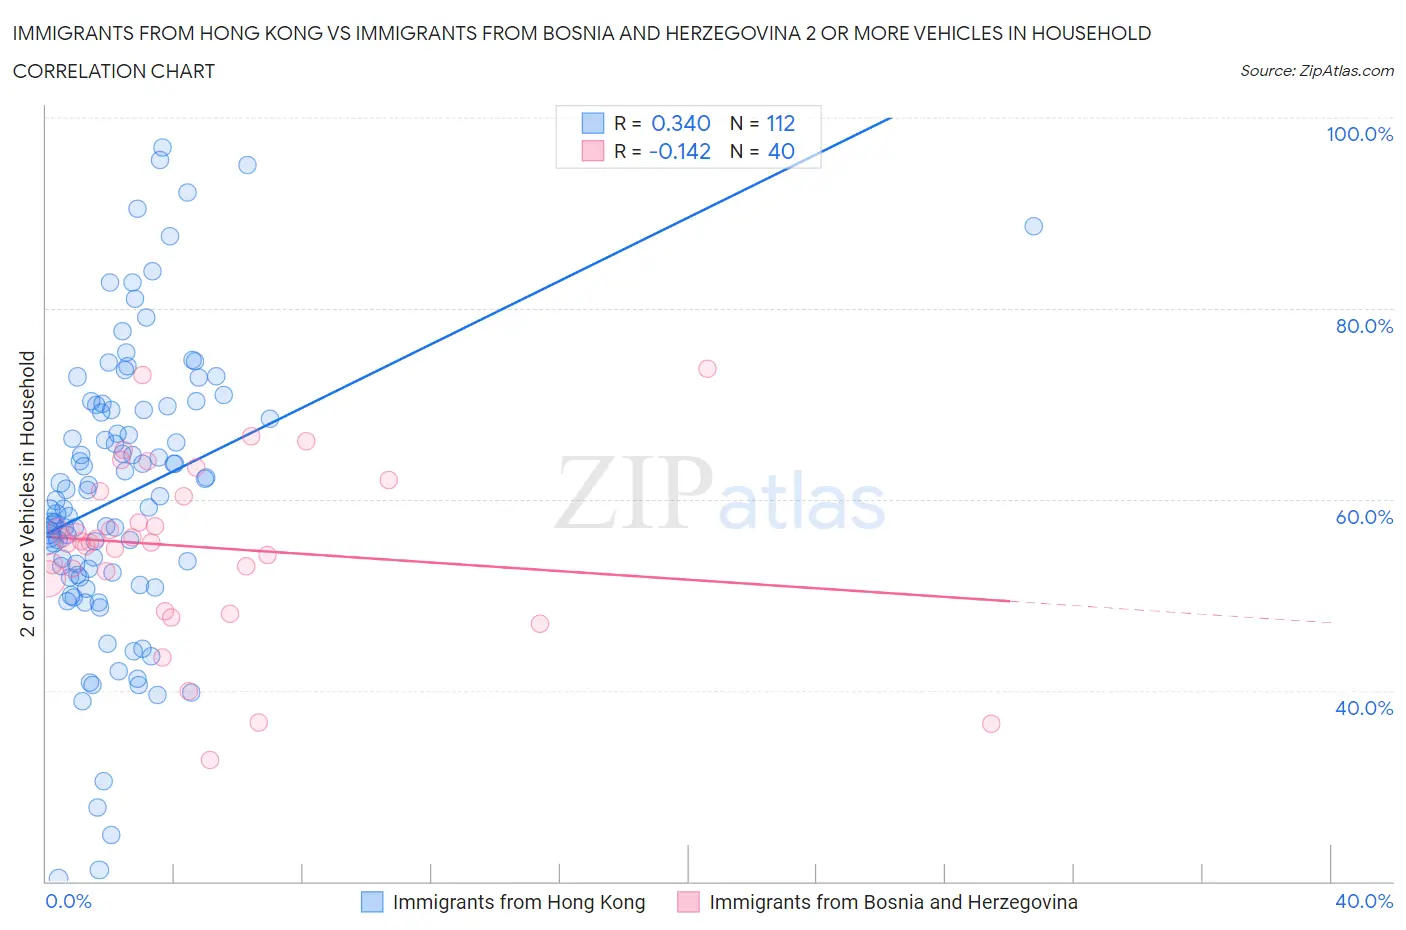 Immigrants from Hong Kong vs Immigrants from Bosnia and Herzegovina 2 or more Vehicles in Household